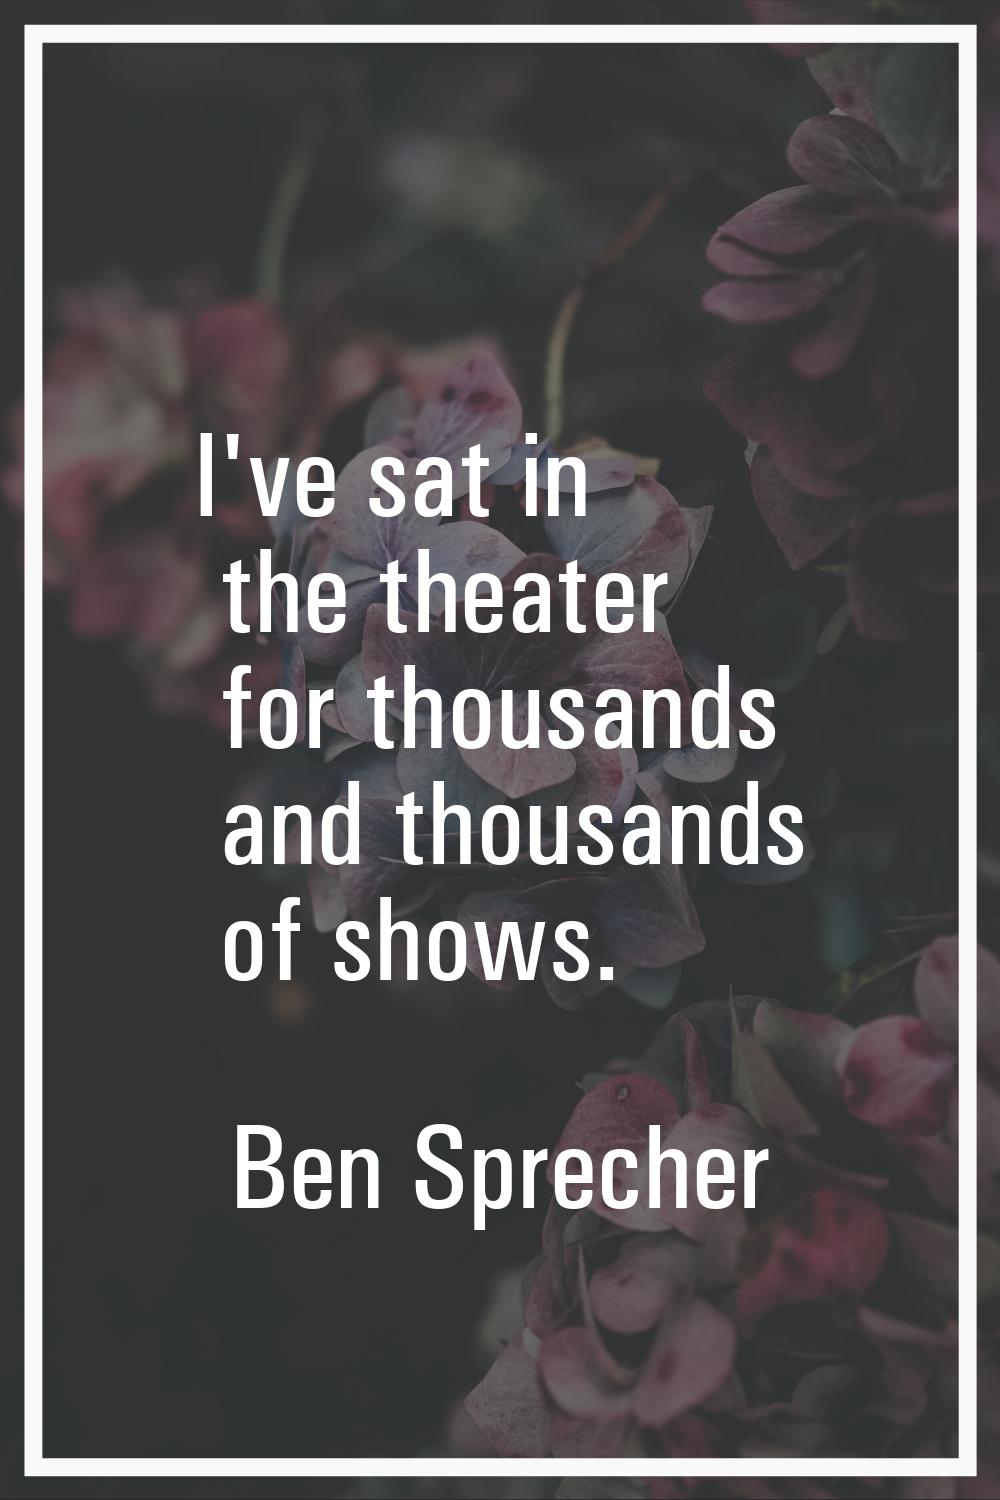 I've sat in the theater for thousands and thousands of shows.